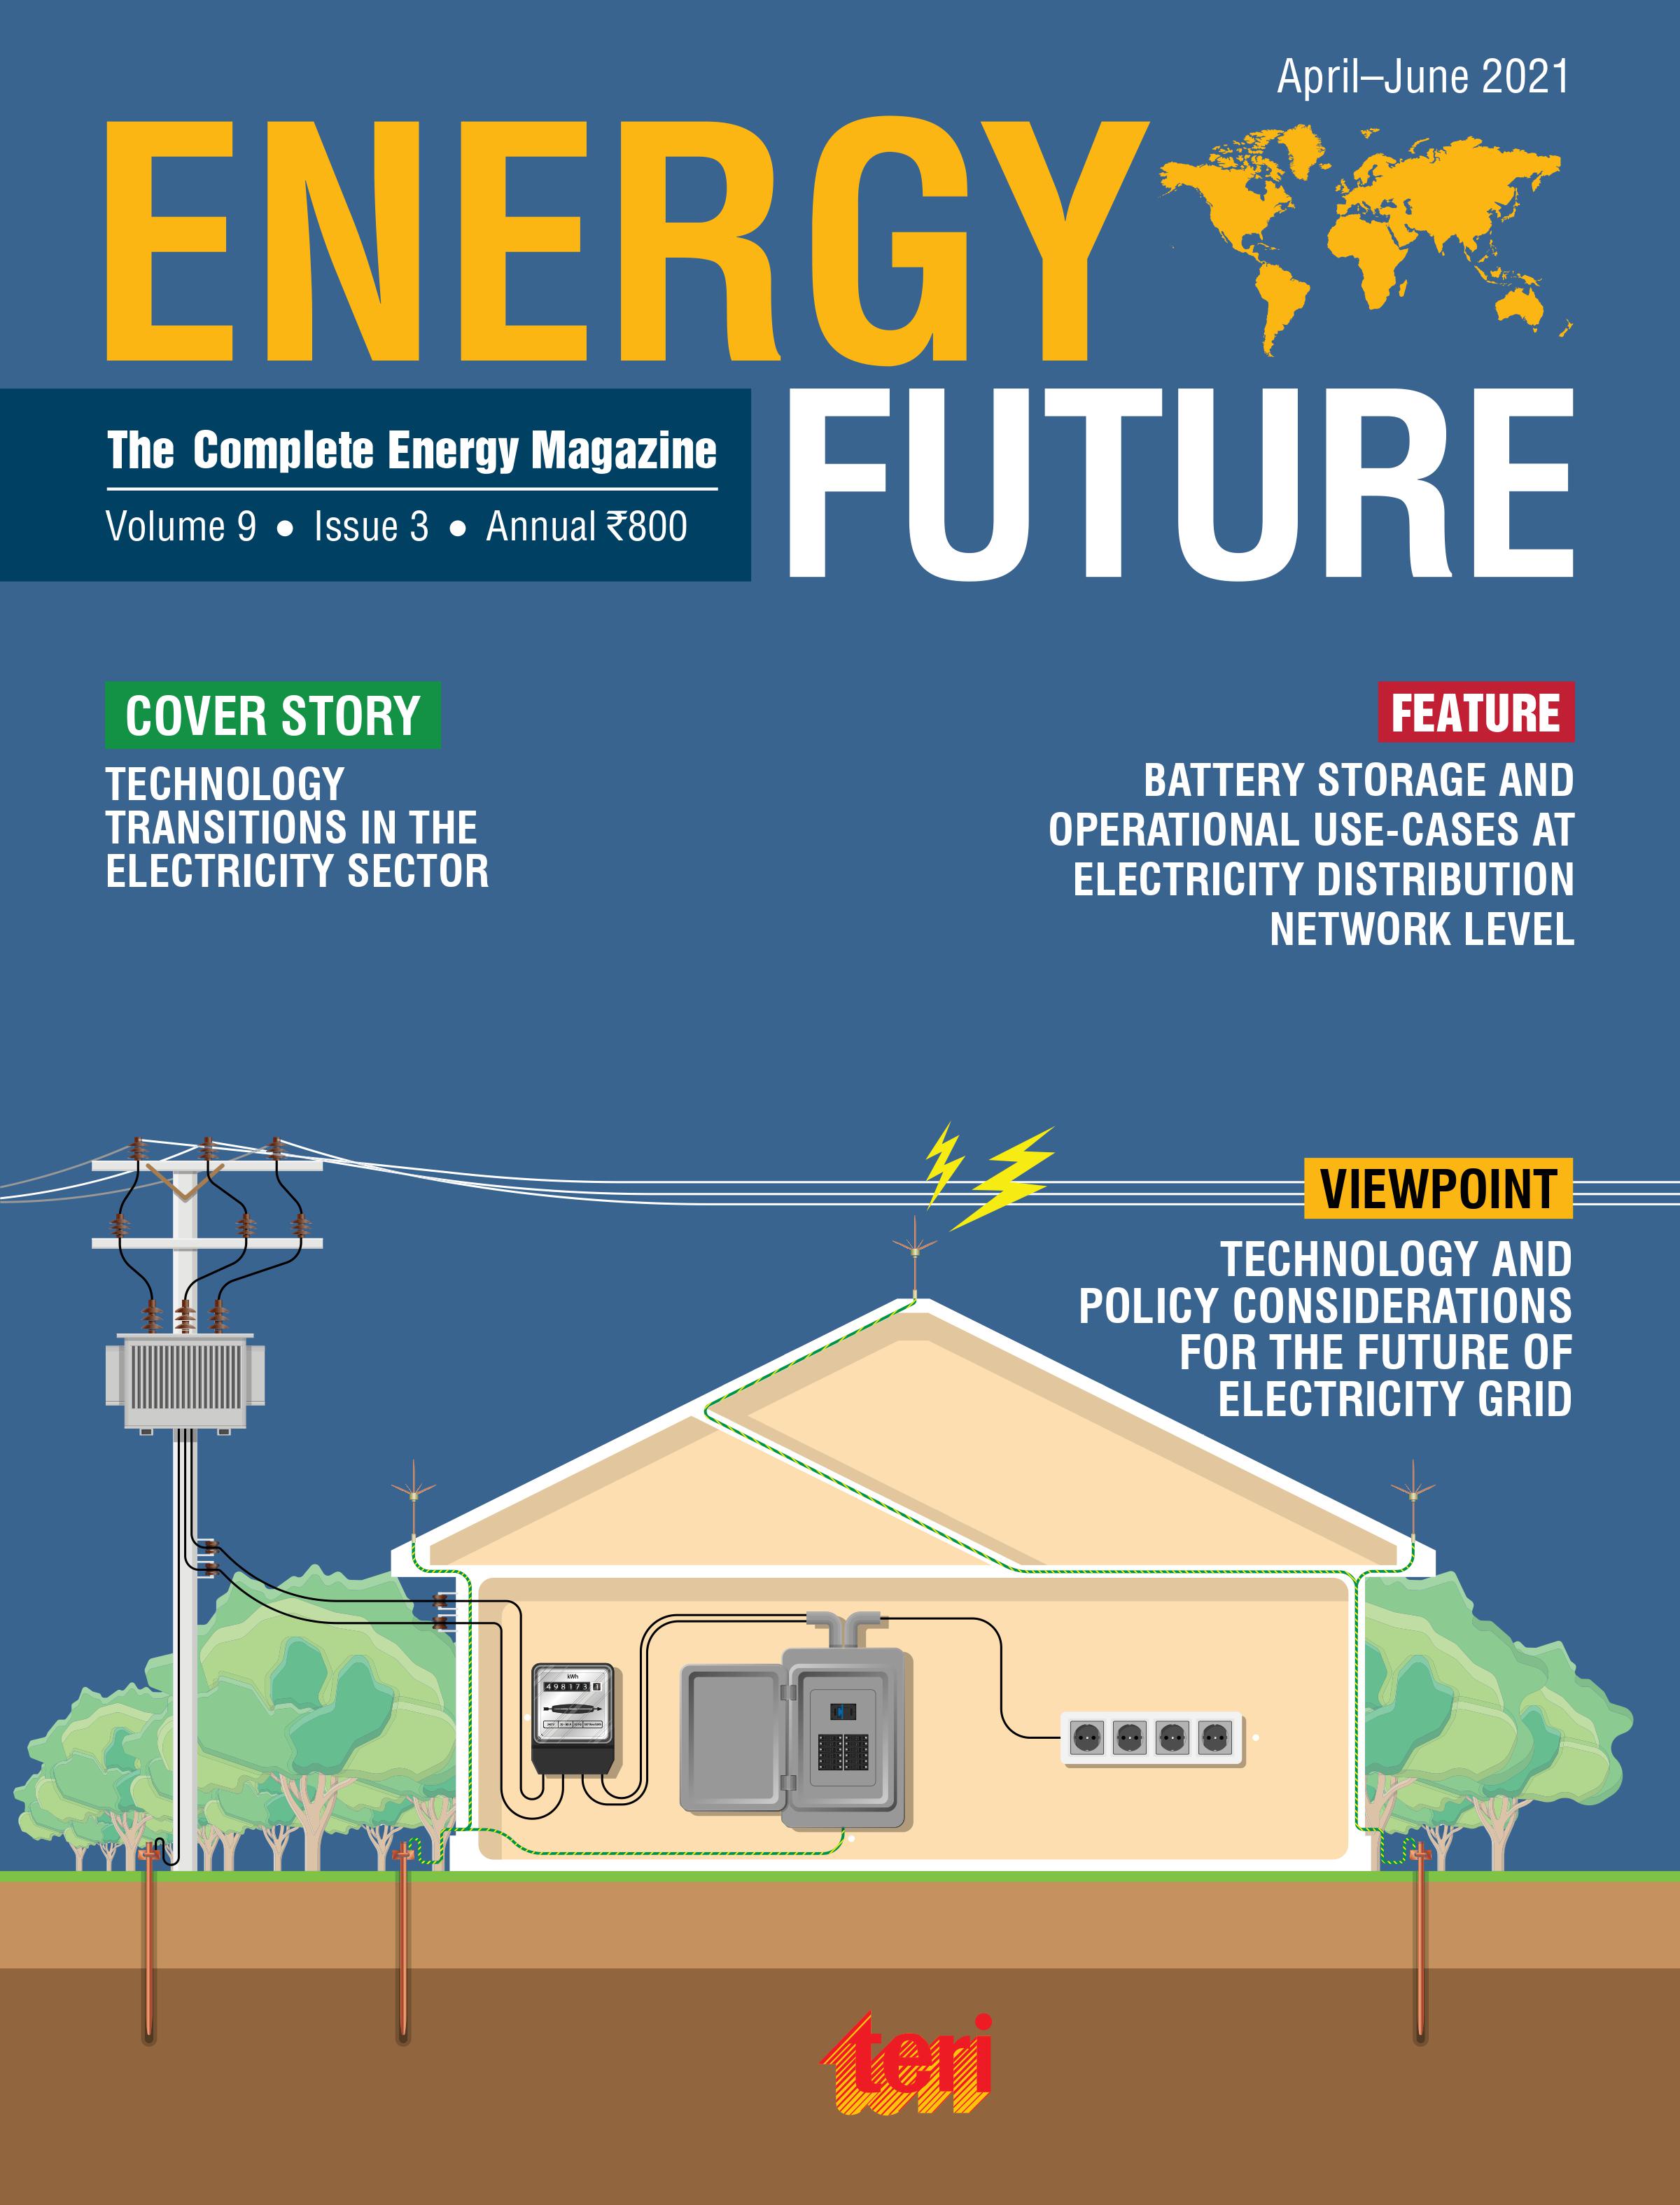 Startups incubated at VJTI-TBI covered by ENERGY FUTURE Magazine, April-June 2021 issue